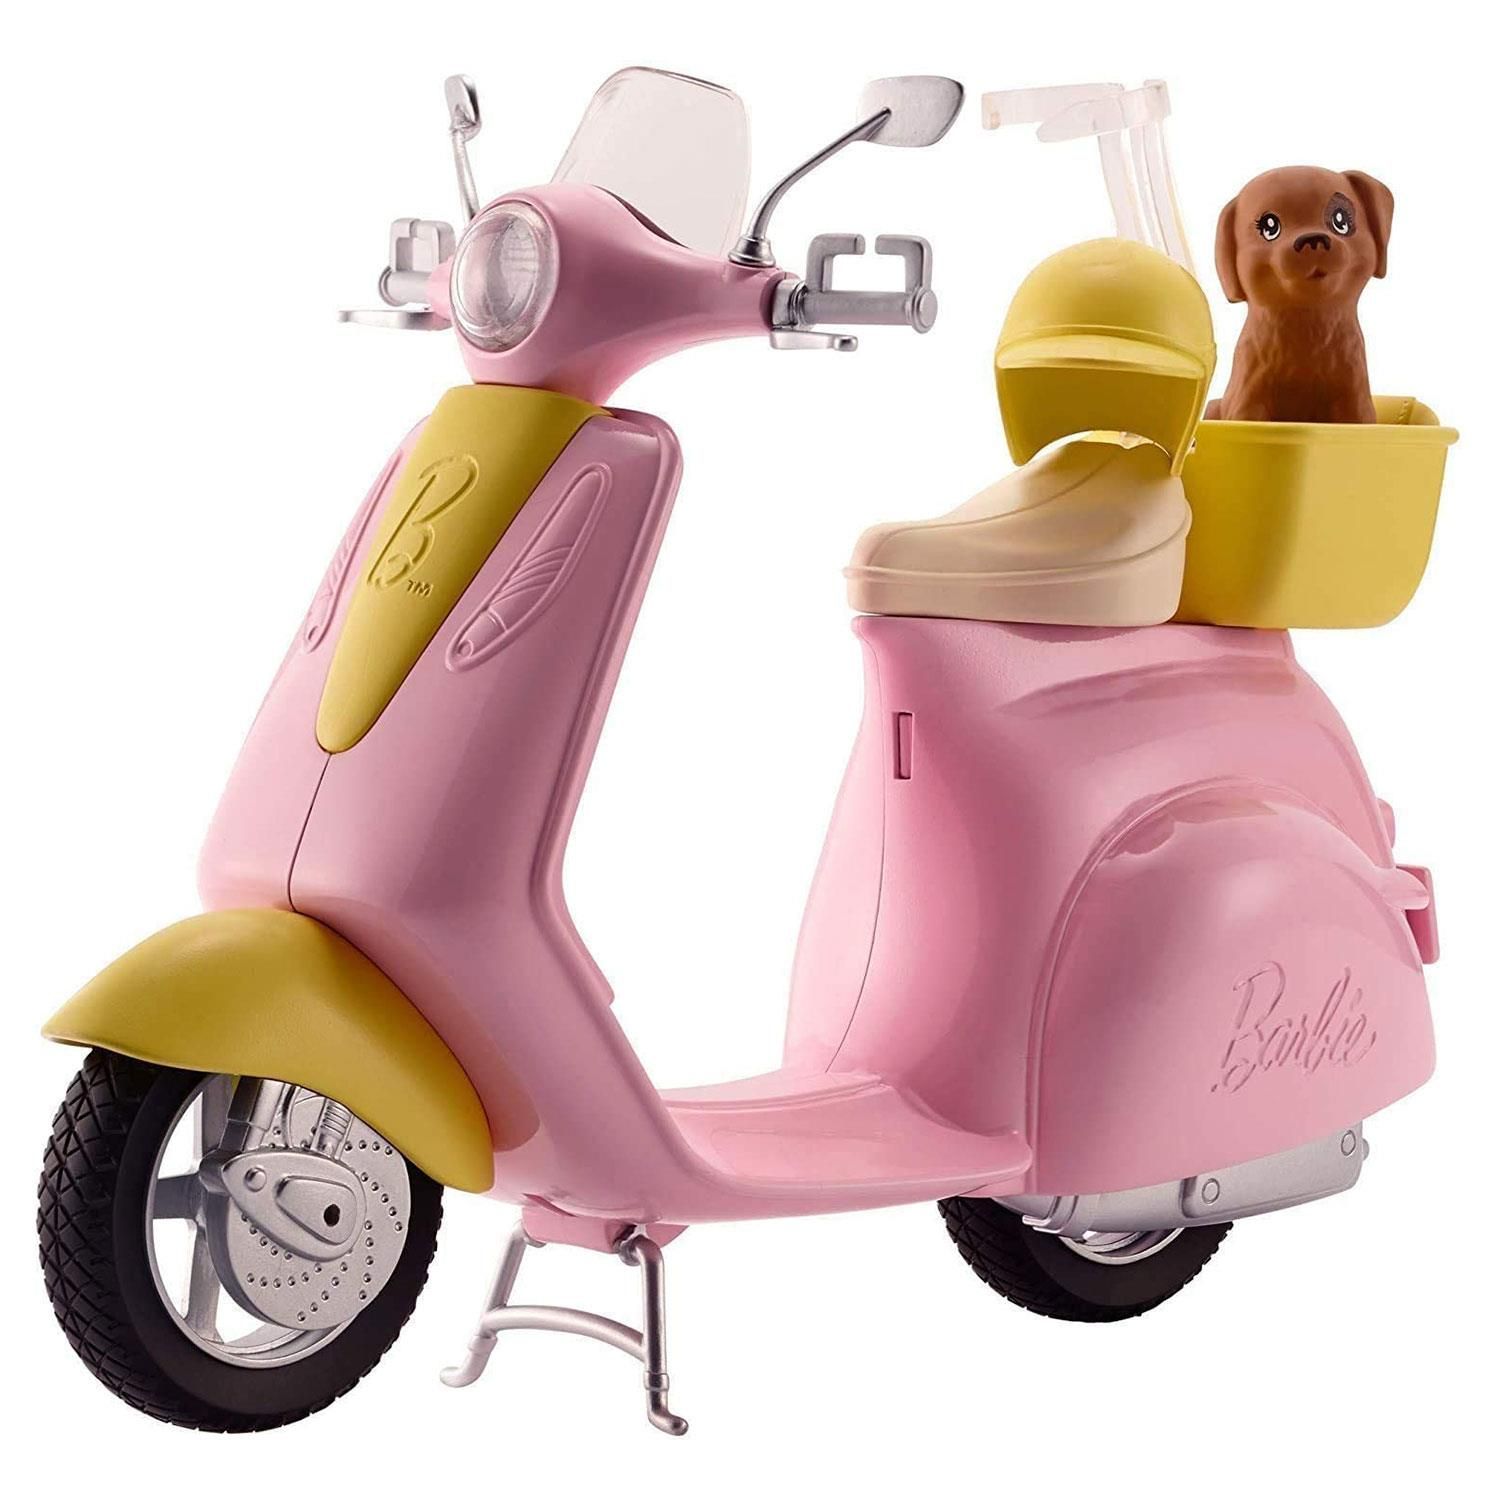 Scoot into fun with this Barbie moped. It comes with a pet friend who's always ready to ride! Designed in pink and yellow with silvery accents, the moped is trendy and stylish. Place Barbie doll (sold separately) on the seat where a clip holds her in place. Lift up the kickstand and push to head into imagination. Bring along the puppy in the yellow basket on the back. And a yellow helmet for the Barbie doll lets her ride safely in style. Whether you are going for a short ride or driving into adventure, this moped is ready to roll! Includes Barbie moped with basket, puppy, and helmet; doll not included. Colors and decorations may vary.